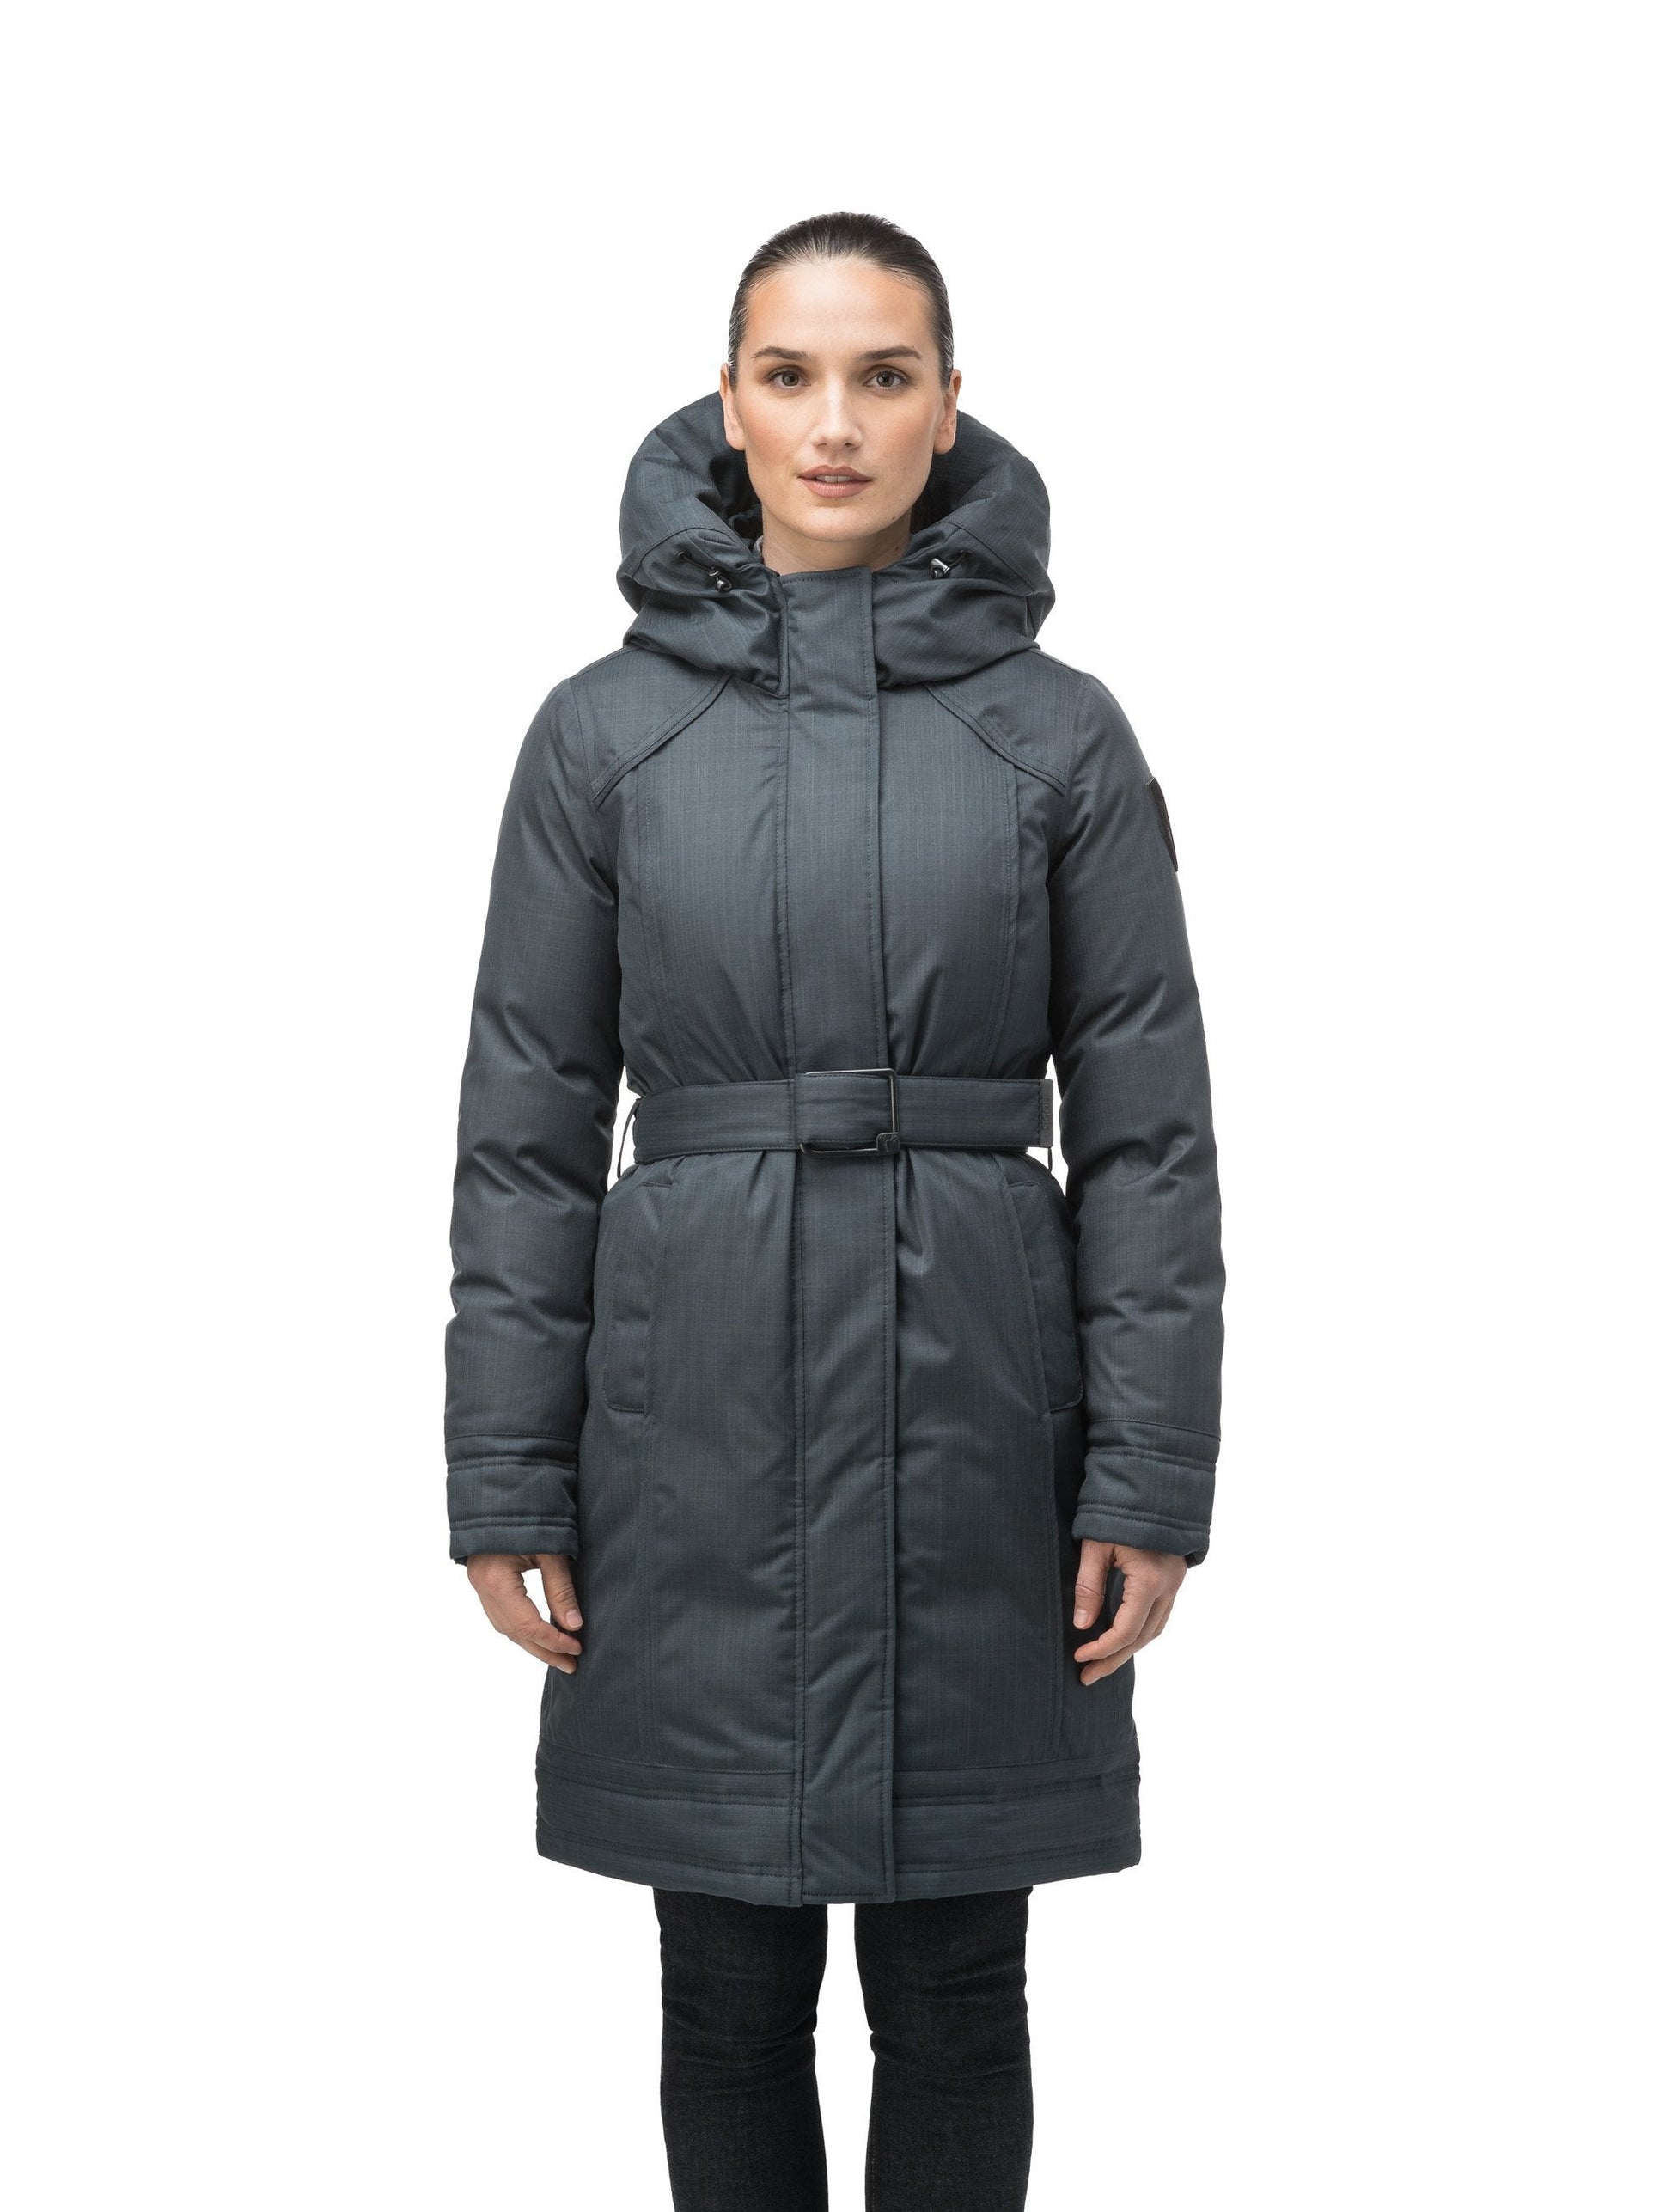 Women's Thigh length own parka with a furless oversized hood in CH Balsam